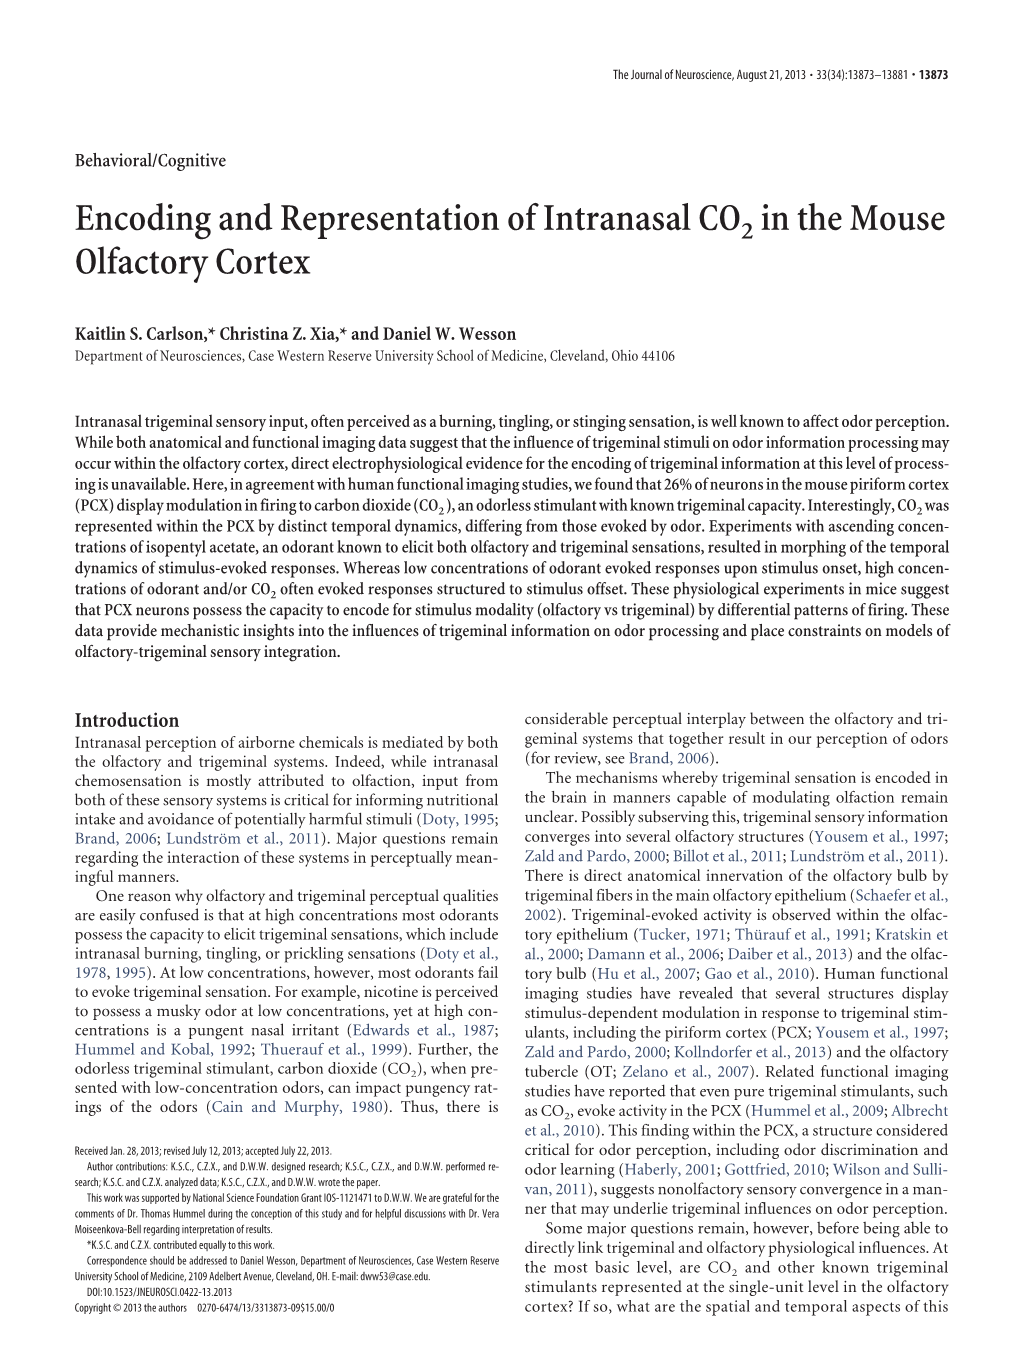 Encoding and Representation of Intranasal CO2 in the Mouse Olfactory Cortex